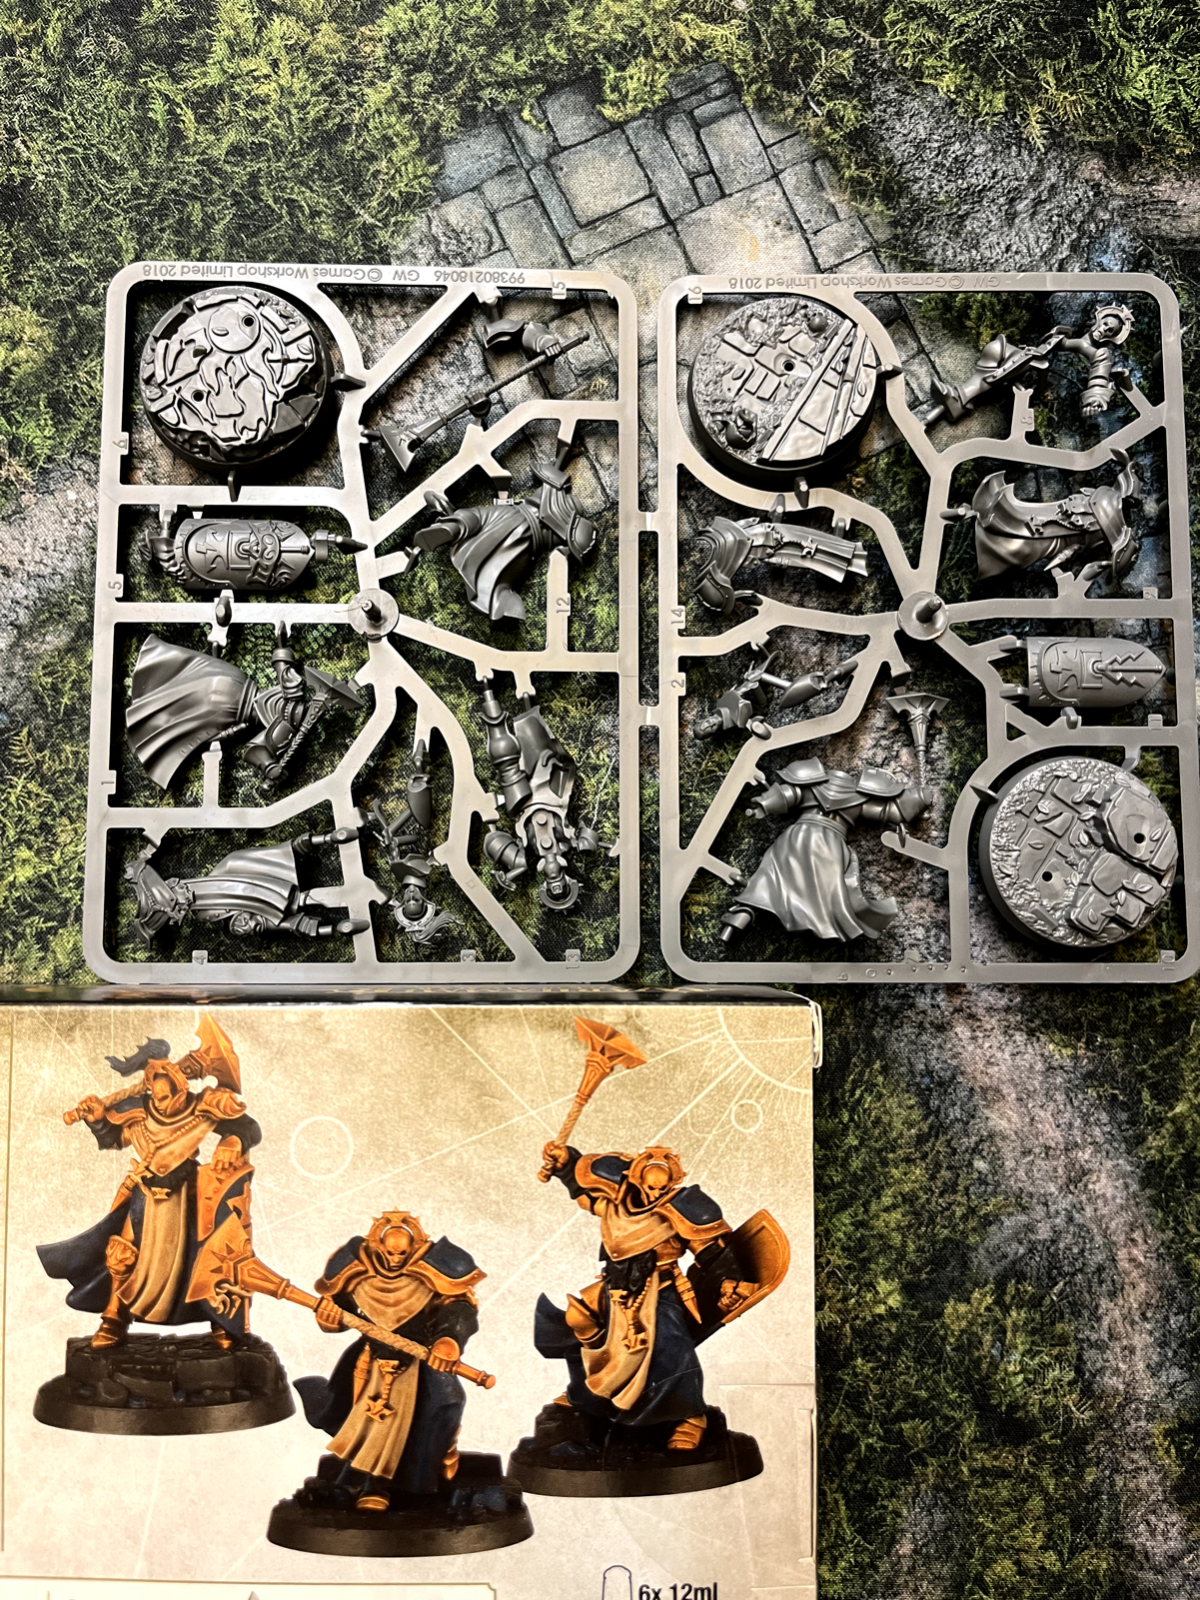 3 Sequitors Easy to Build (Gussrahmen)